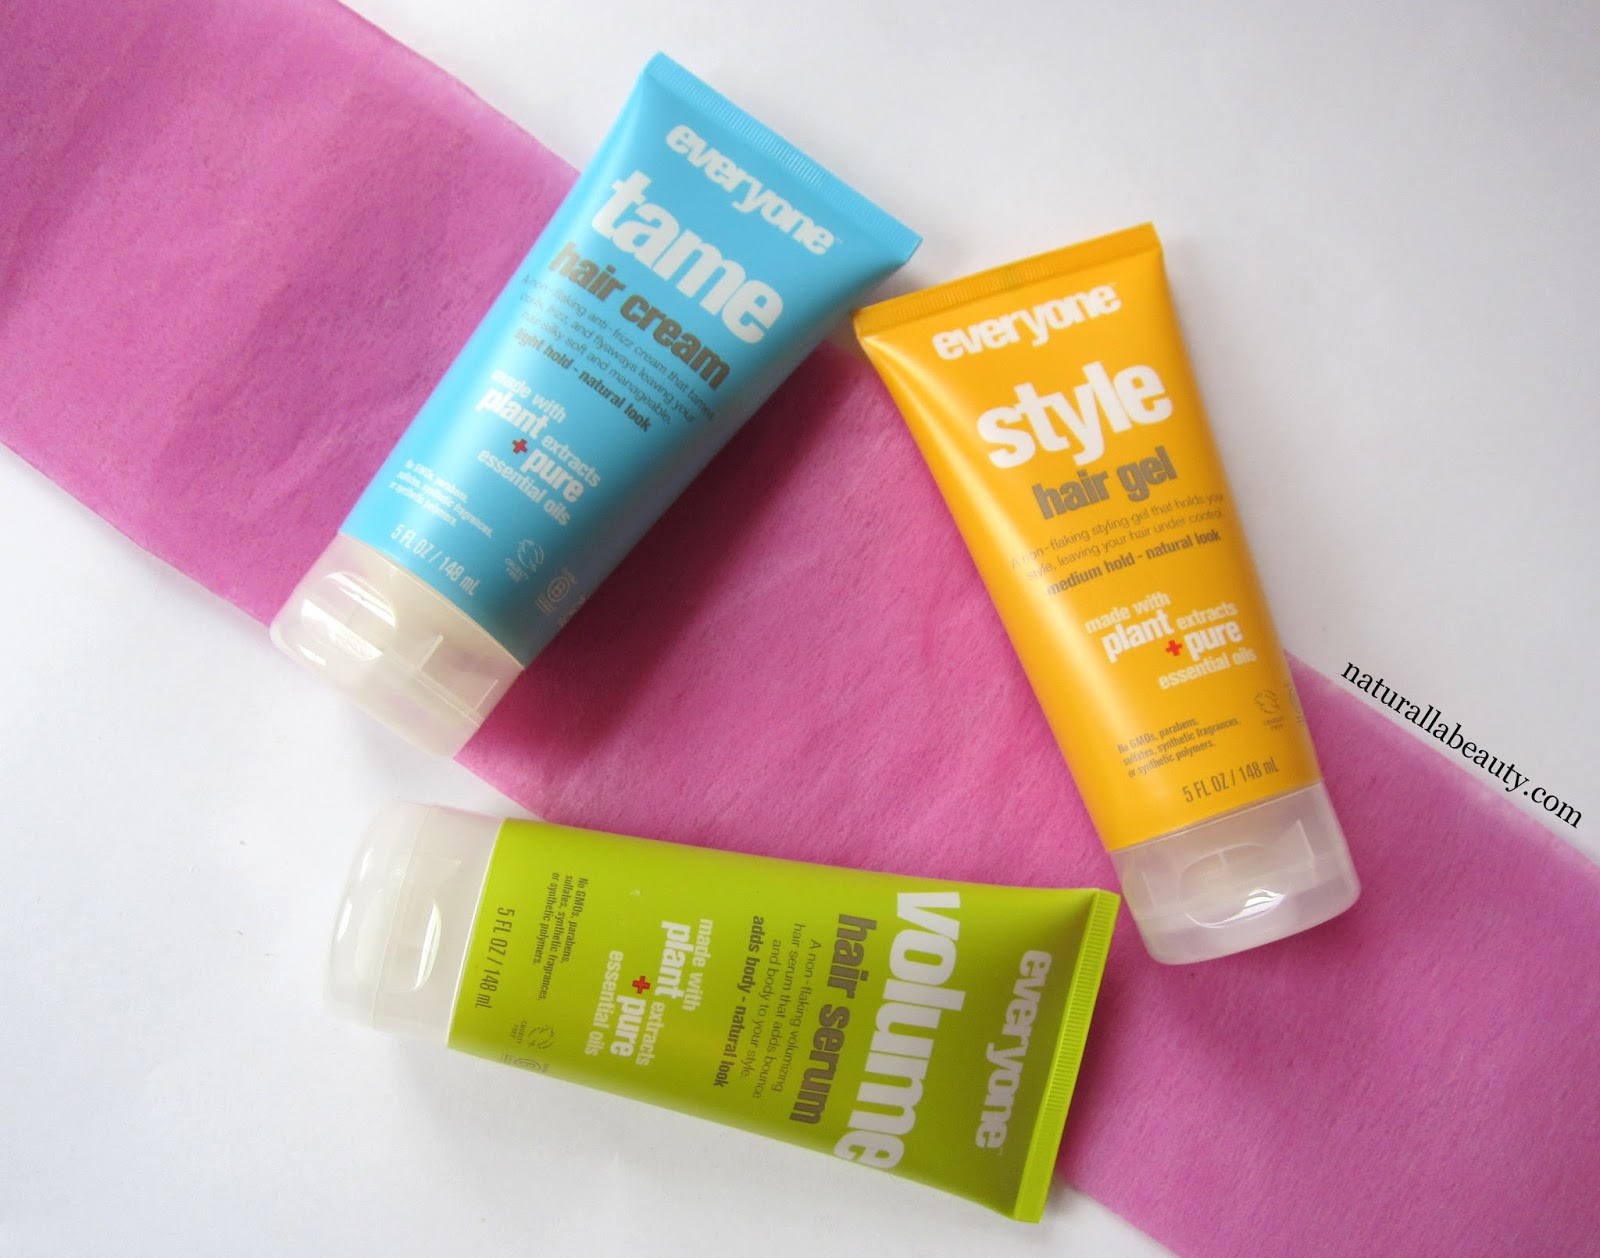 Everyone Hair Styling Products: Style Gel, Tame Cream & Volume Serum -  Naturalla Beauty